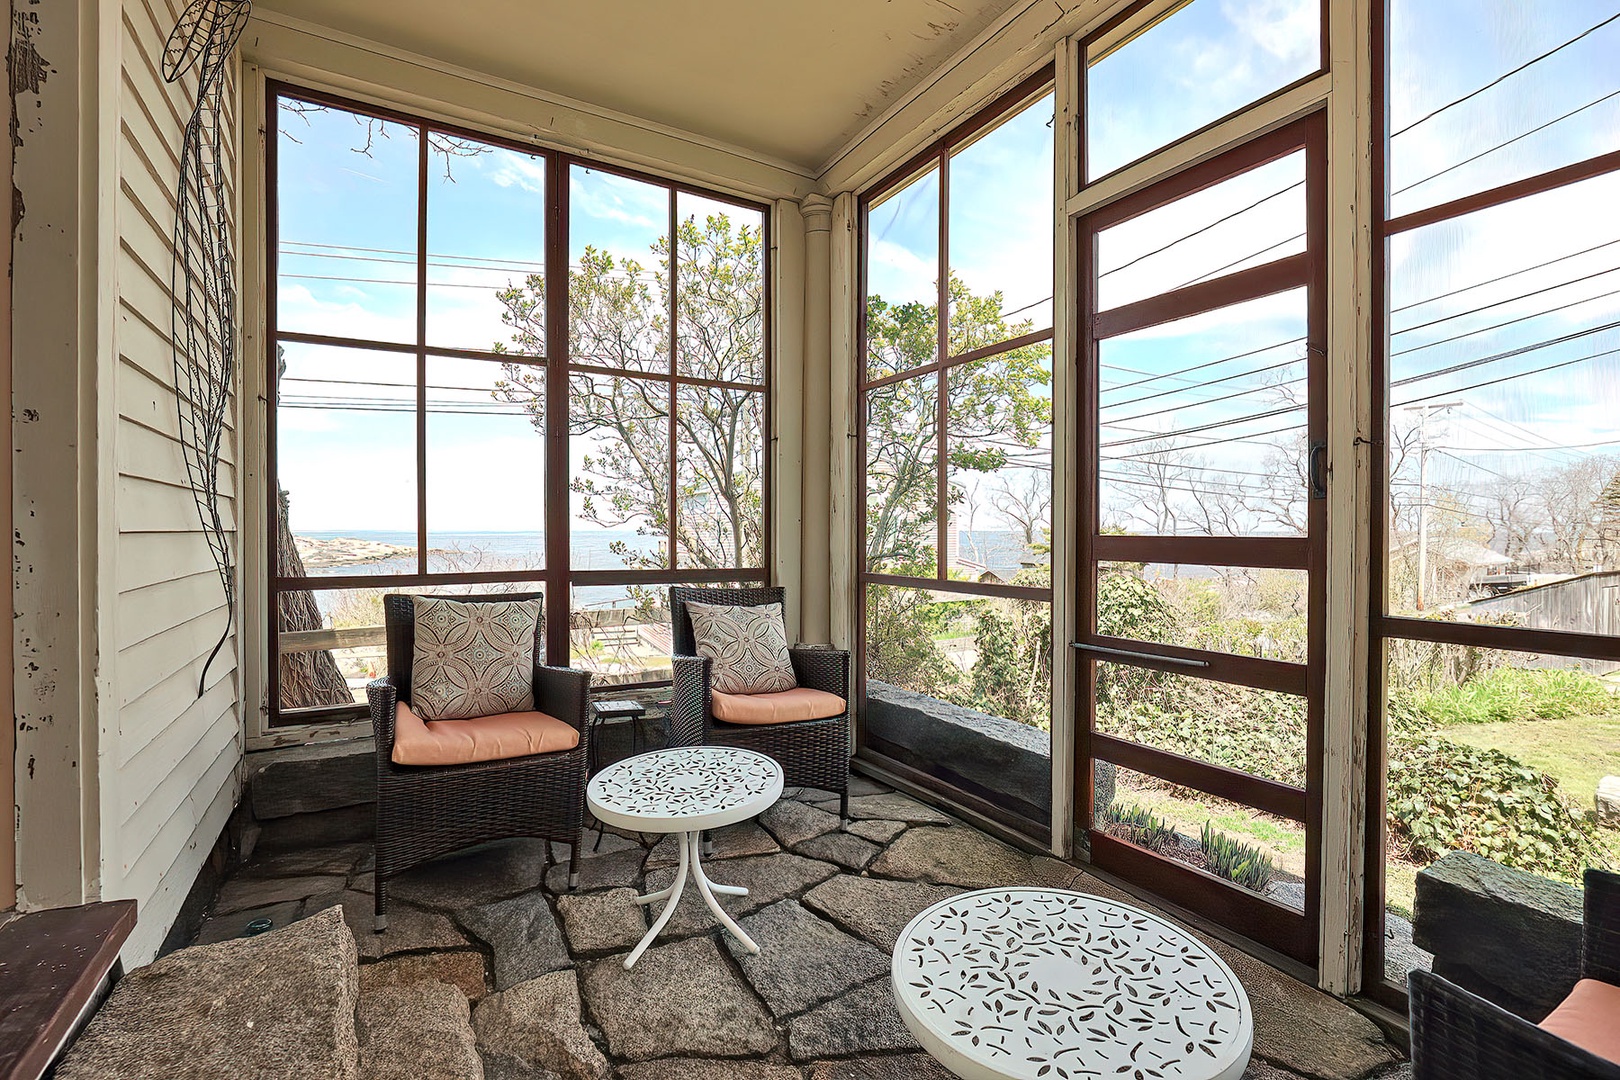 There is a screened porch with ocean views.